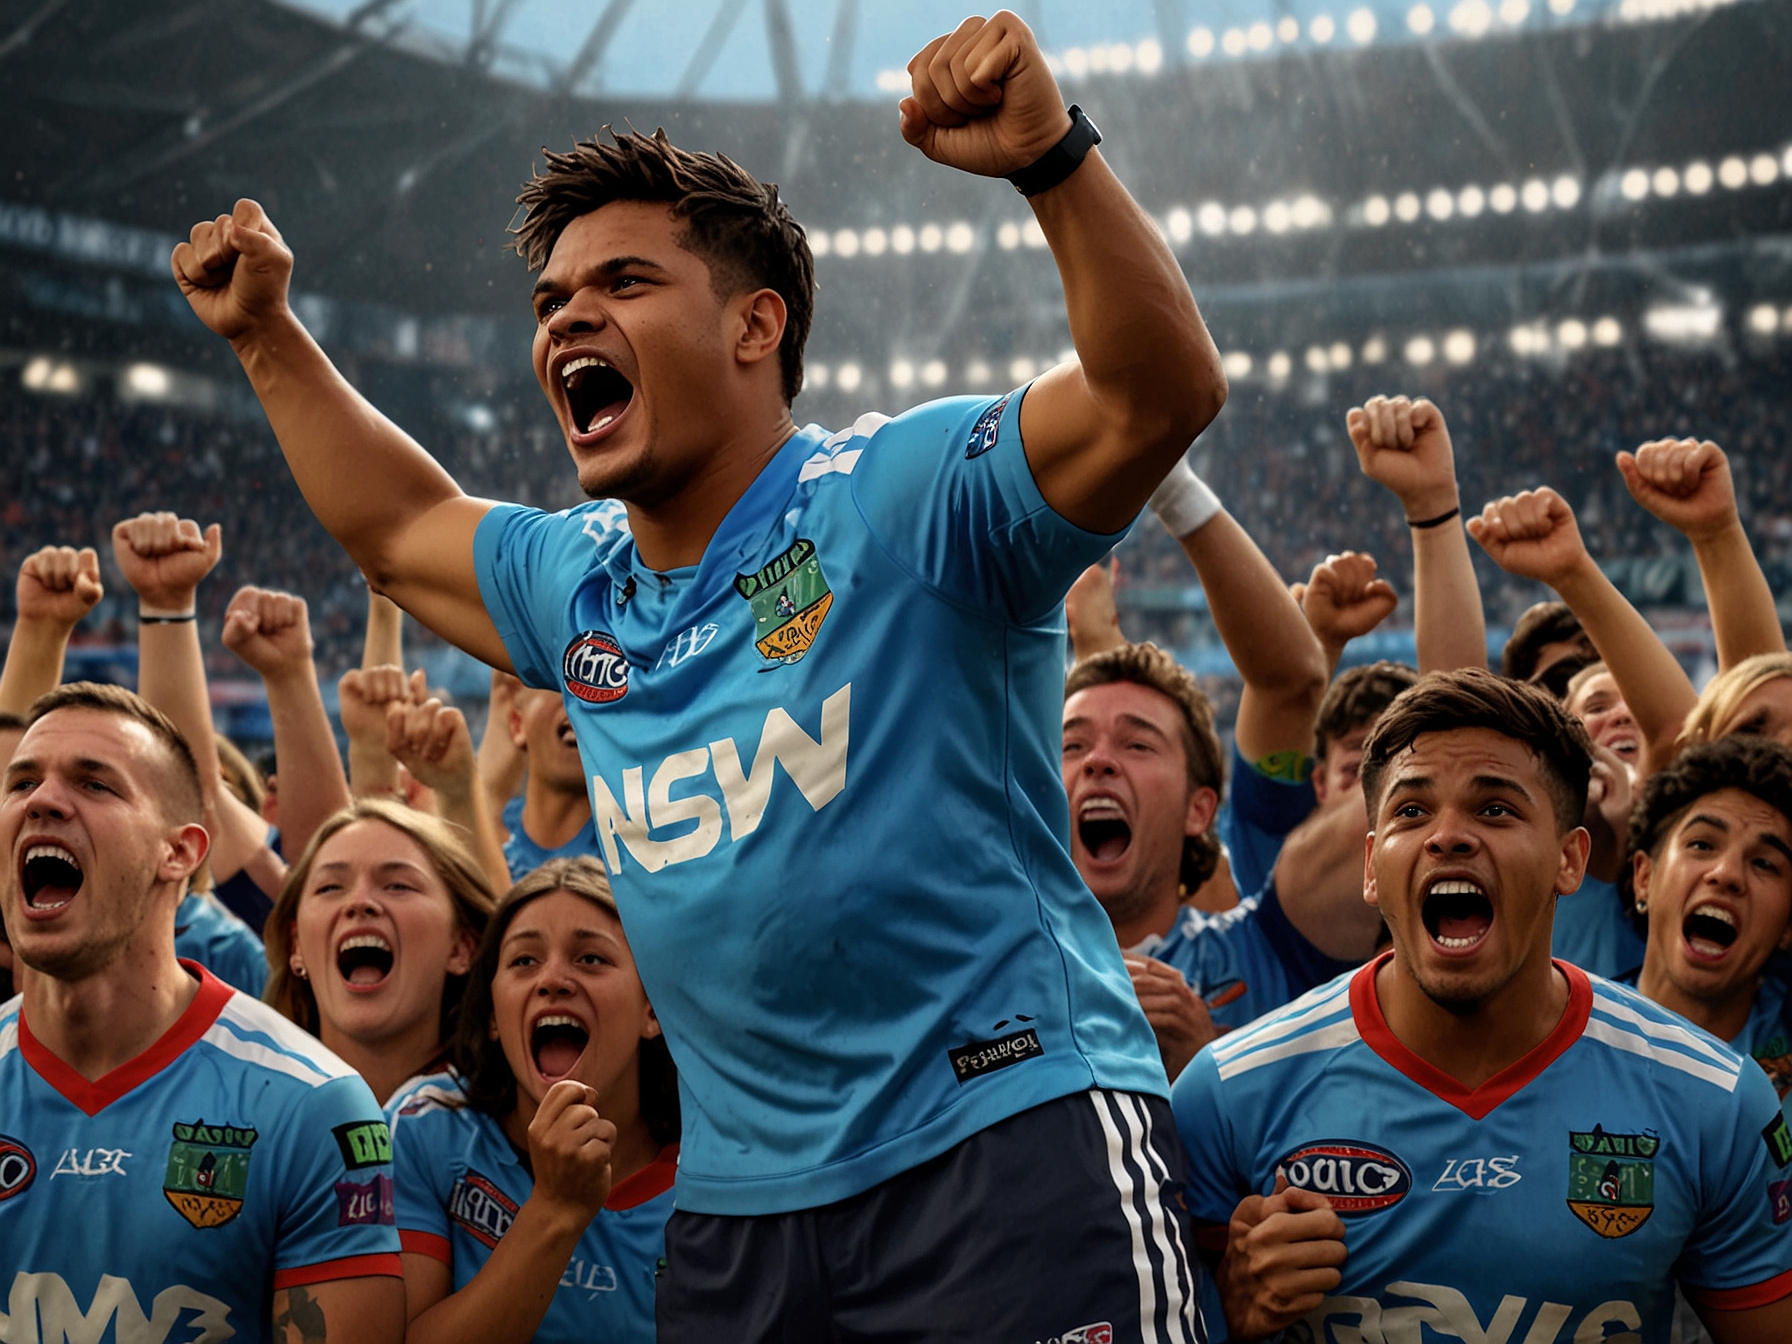 Fans in NSW blue jerseys enthusiastically cheering, capturing the excitement and high expectations surrounding Latrell Mitchell's return to the Origin arena.